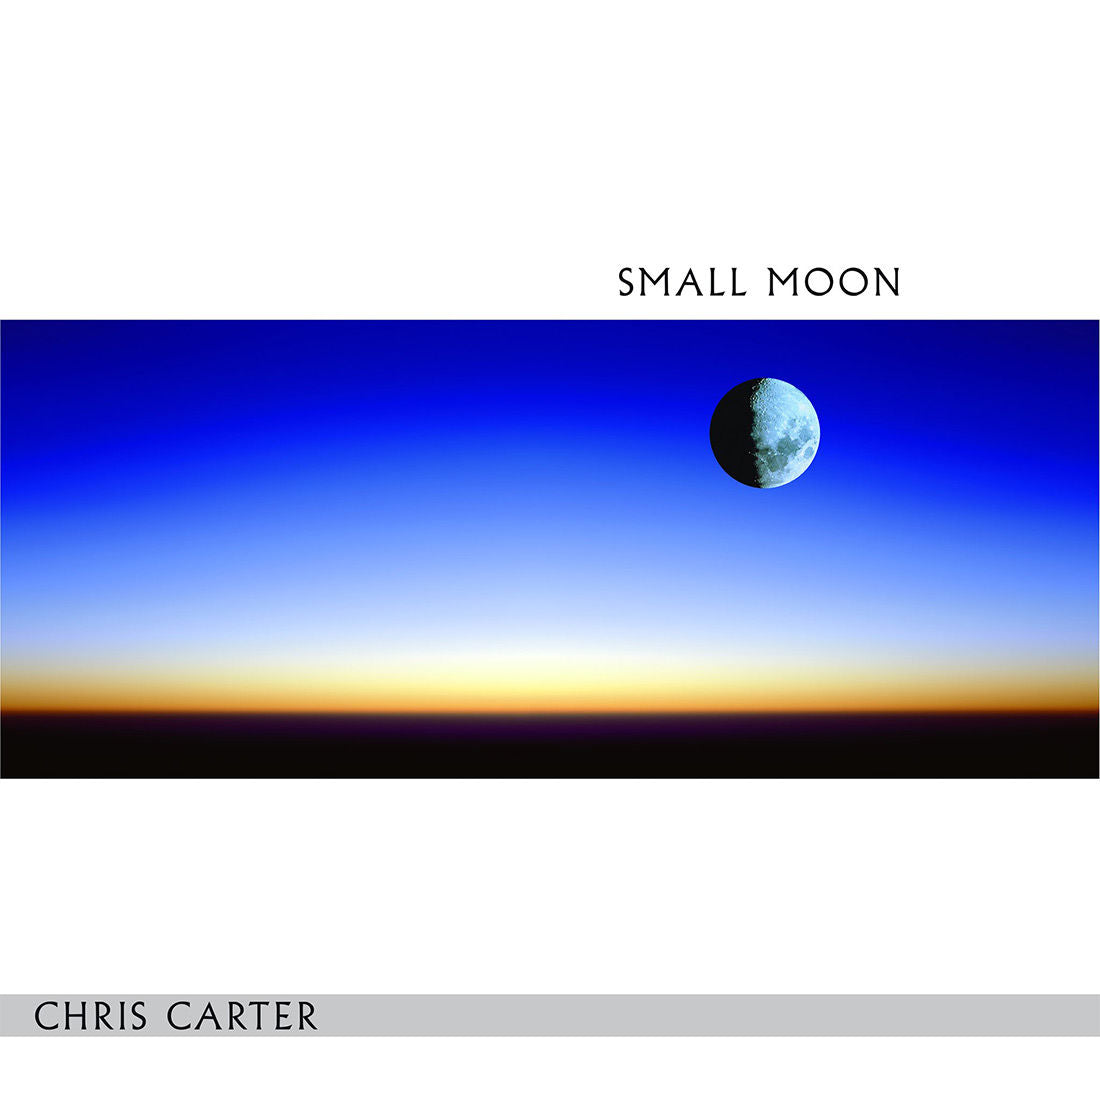 Small Moon: Limited Edition White Vinyl LP